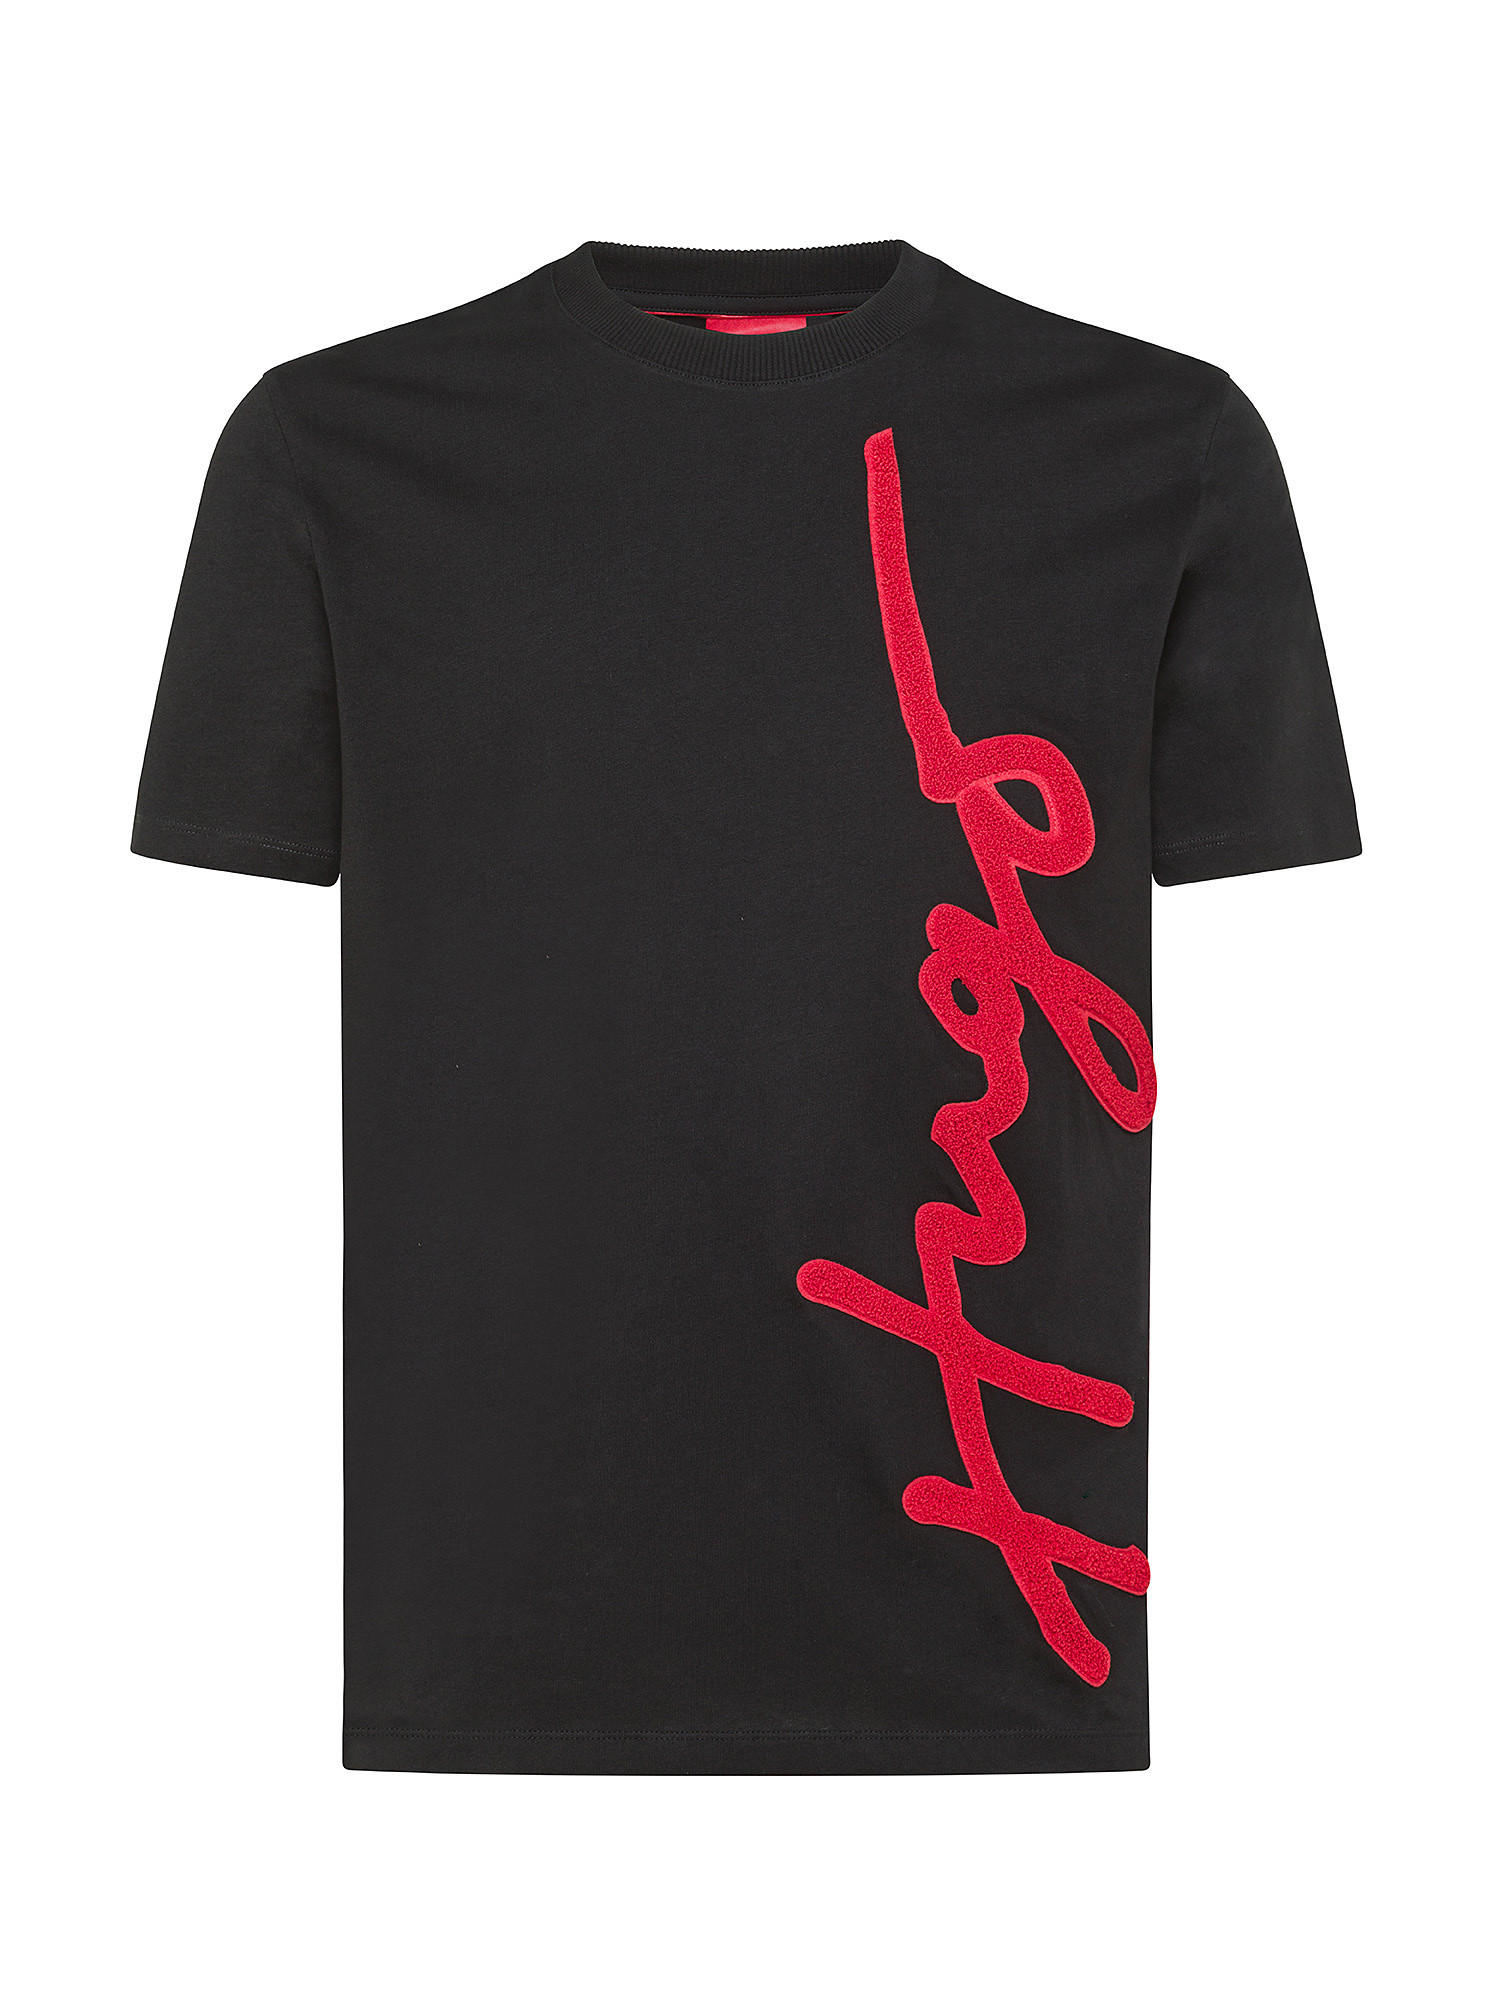 Hugo - T-shirt with embroidered logo in cotton, Black, large image number 0